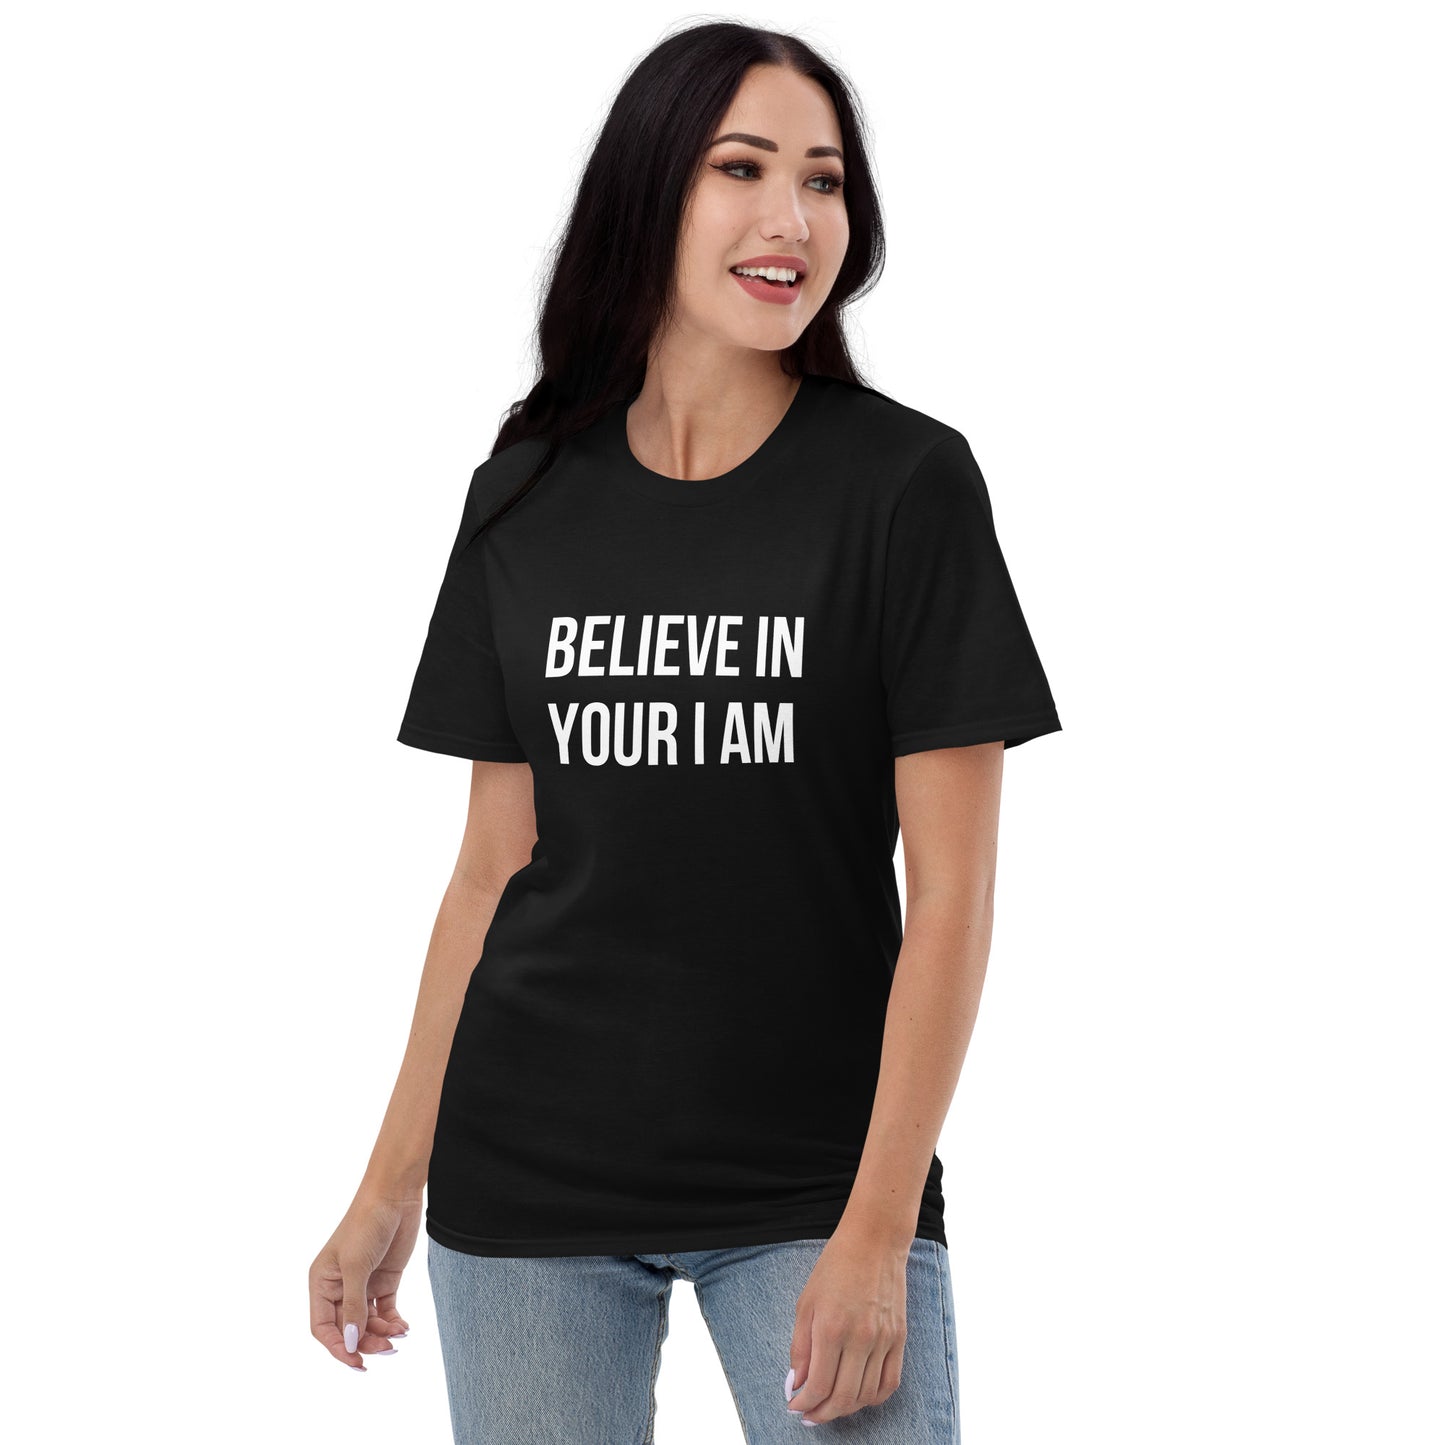 "Believe in Your I AM" T-Shirt